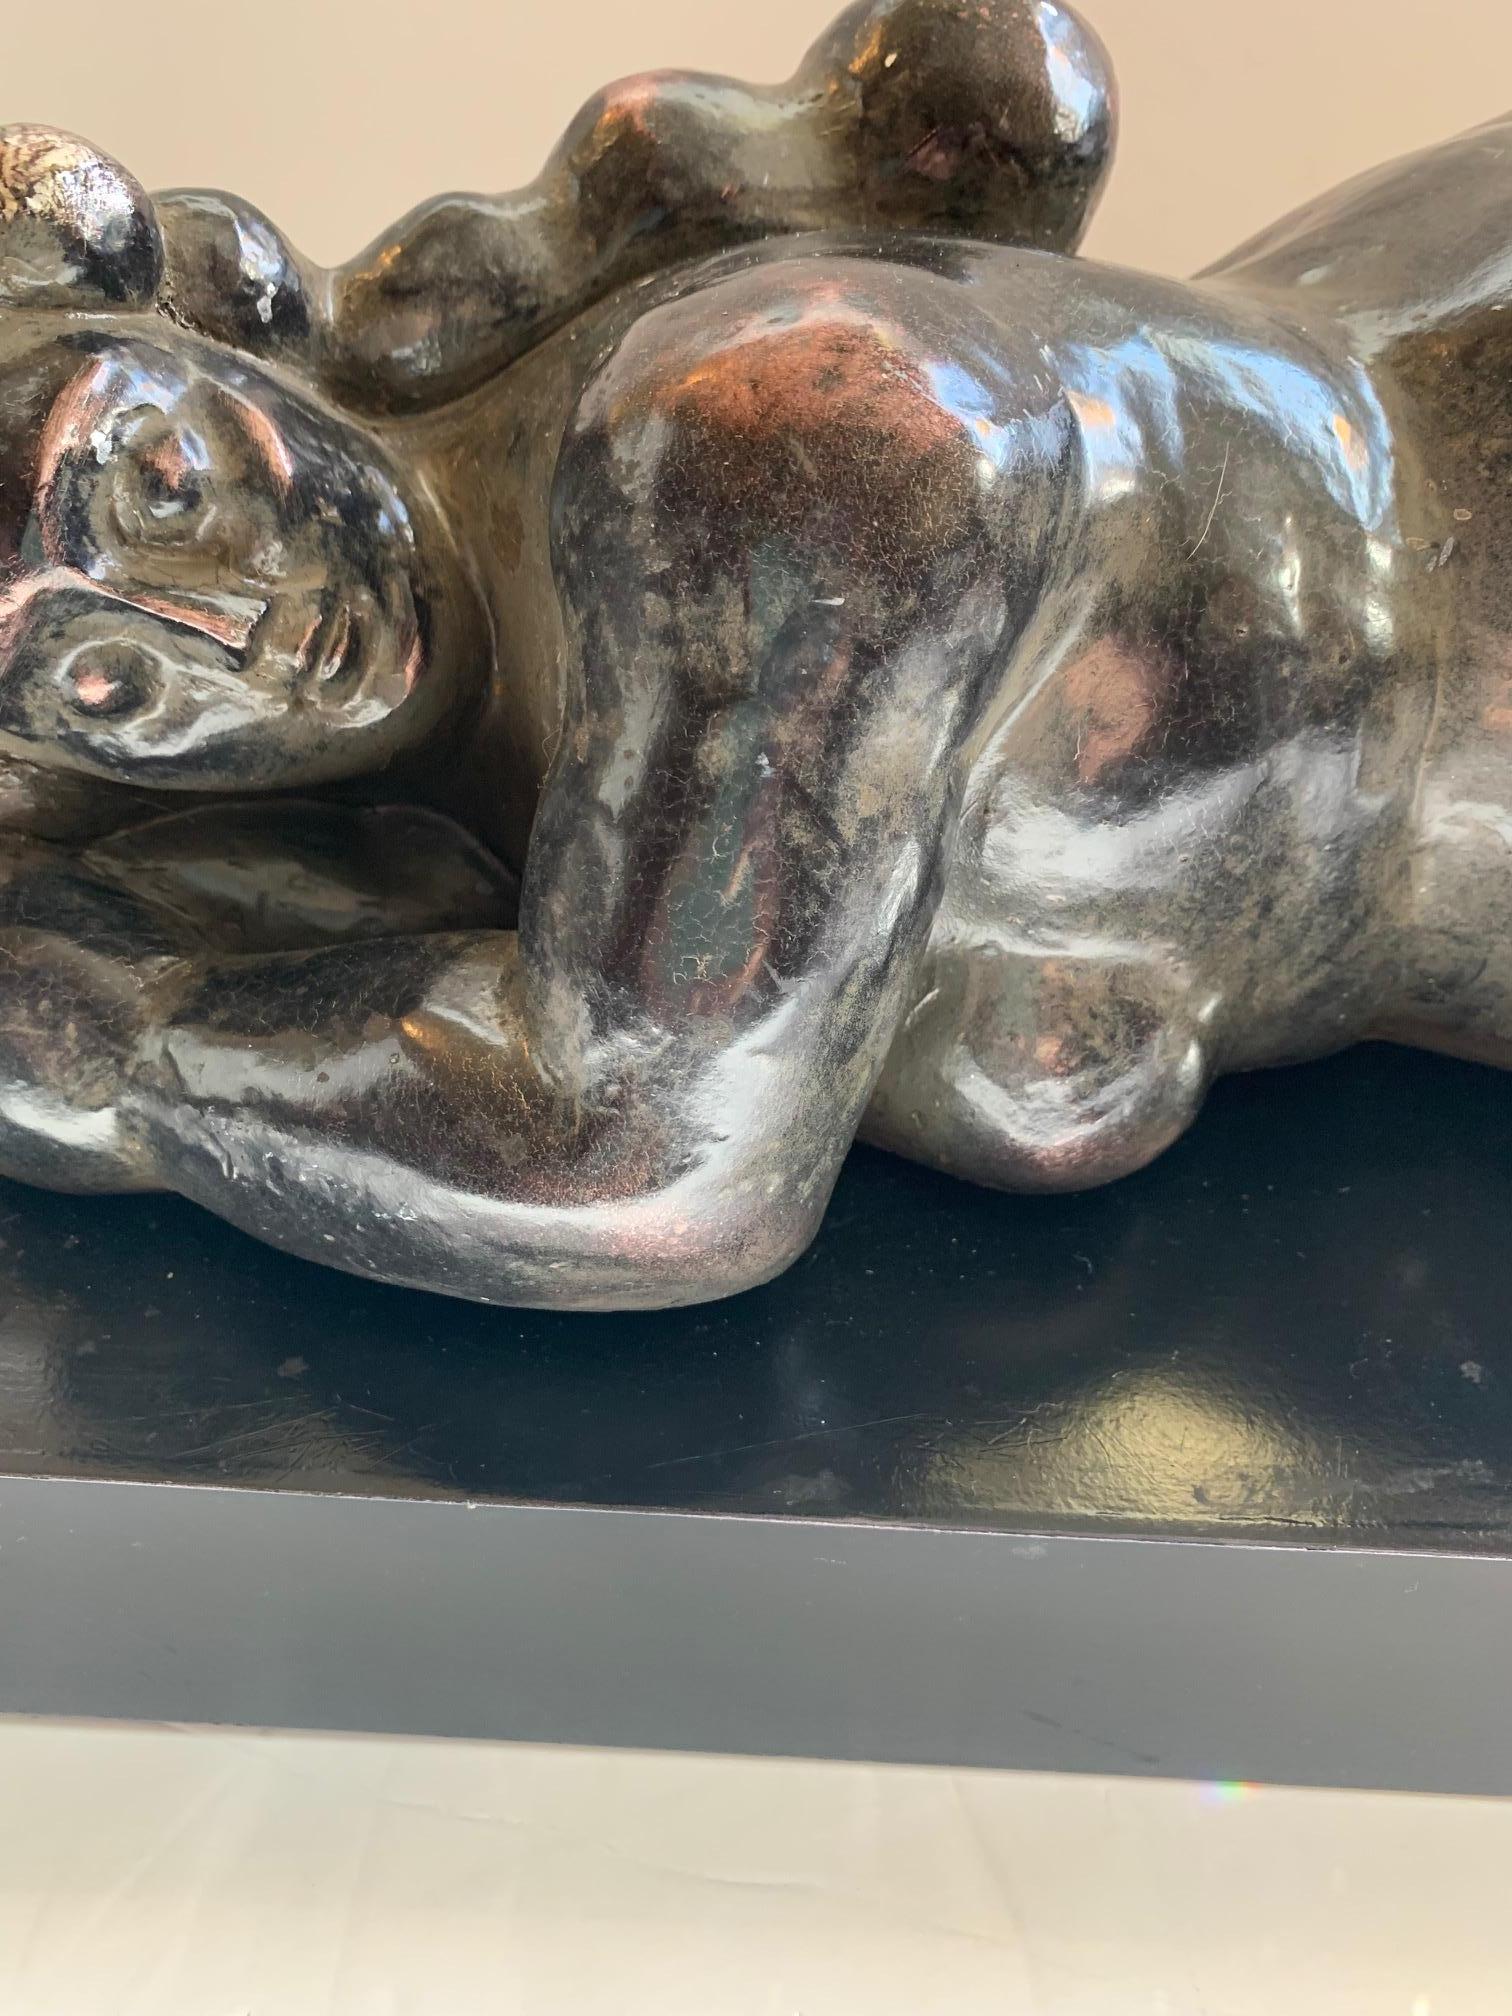 Sensual Reclining Nude Tabletop Sculpture in Style of Botero 4